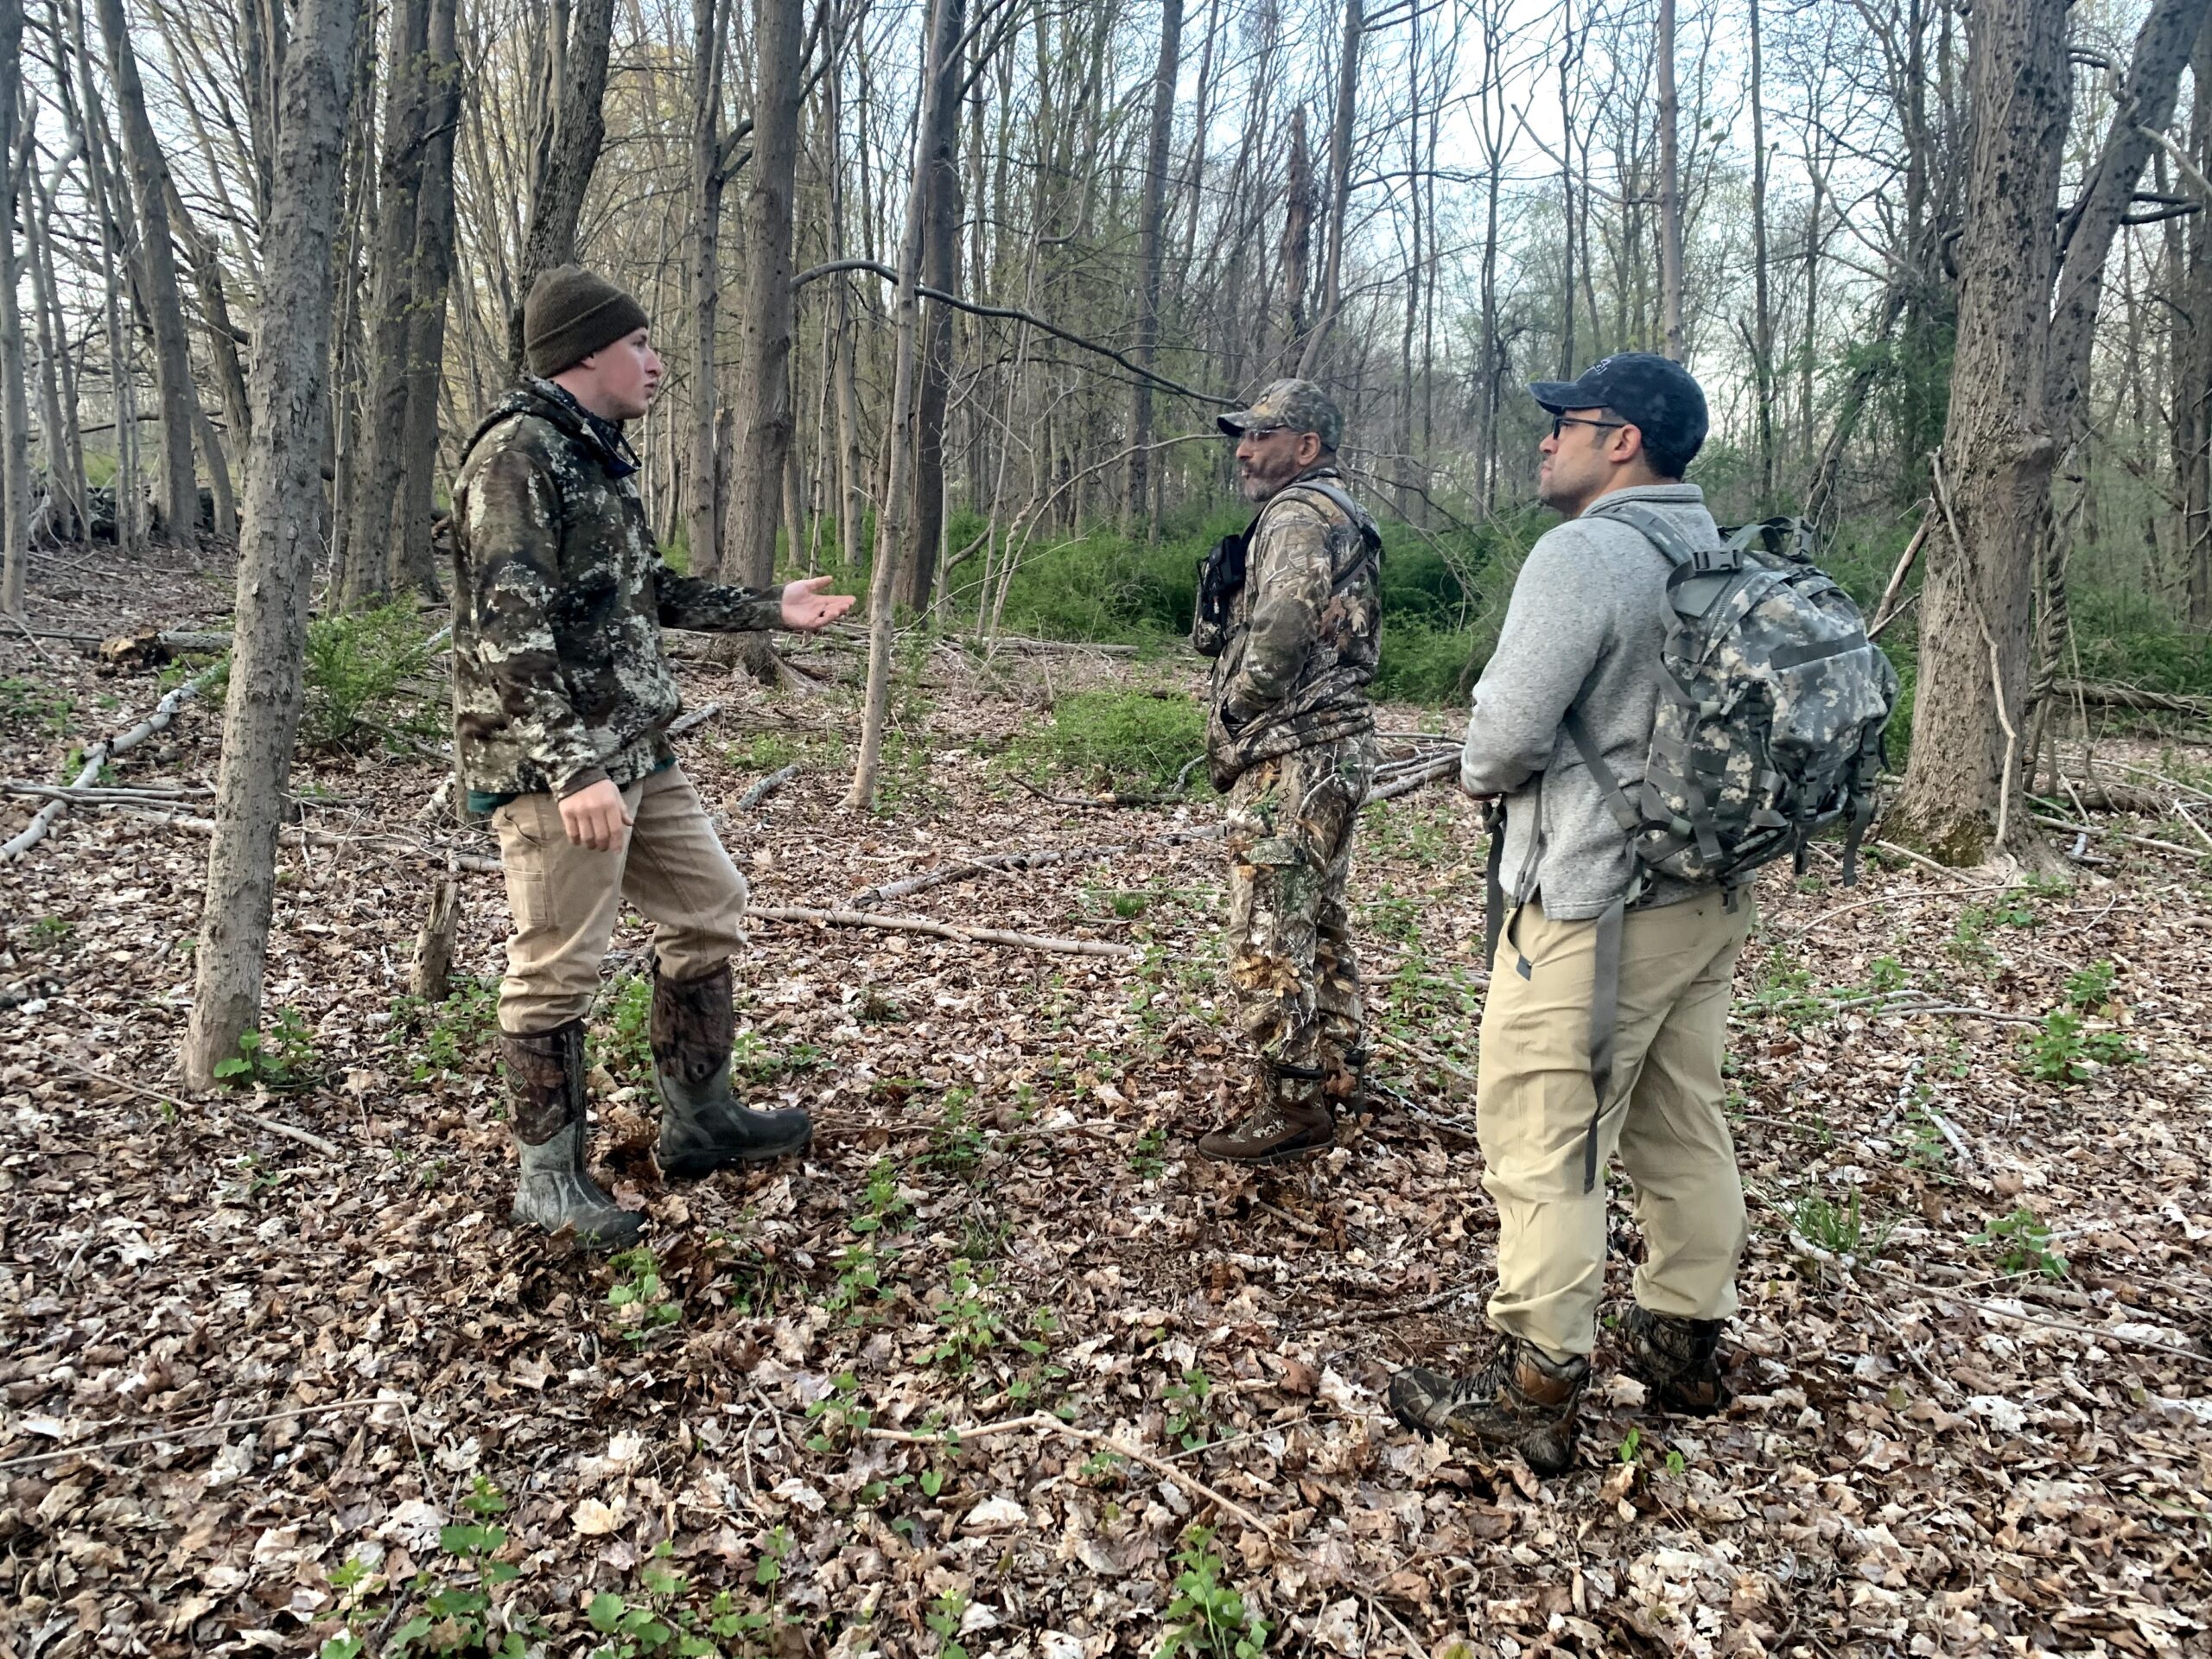 Having a hunting mentor is a big help, but the first solo season can be tough.